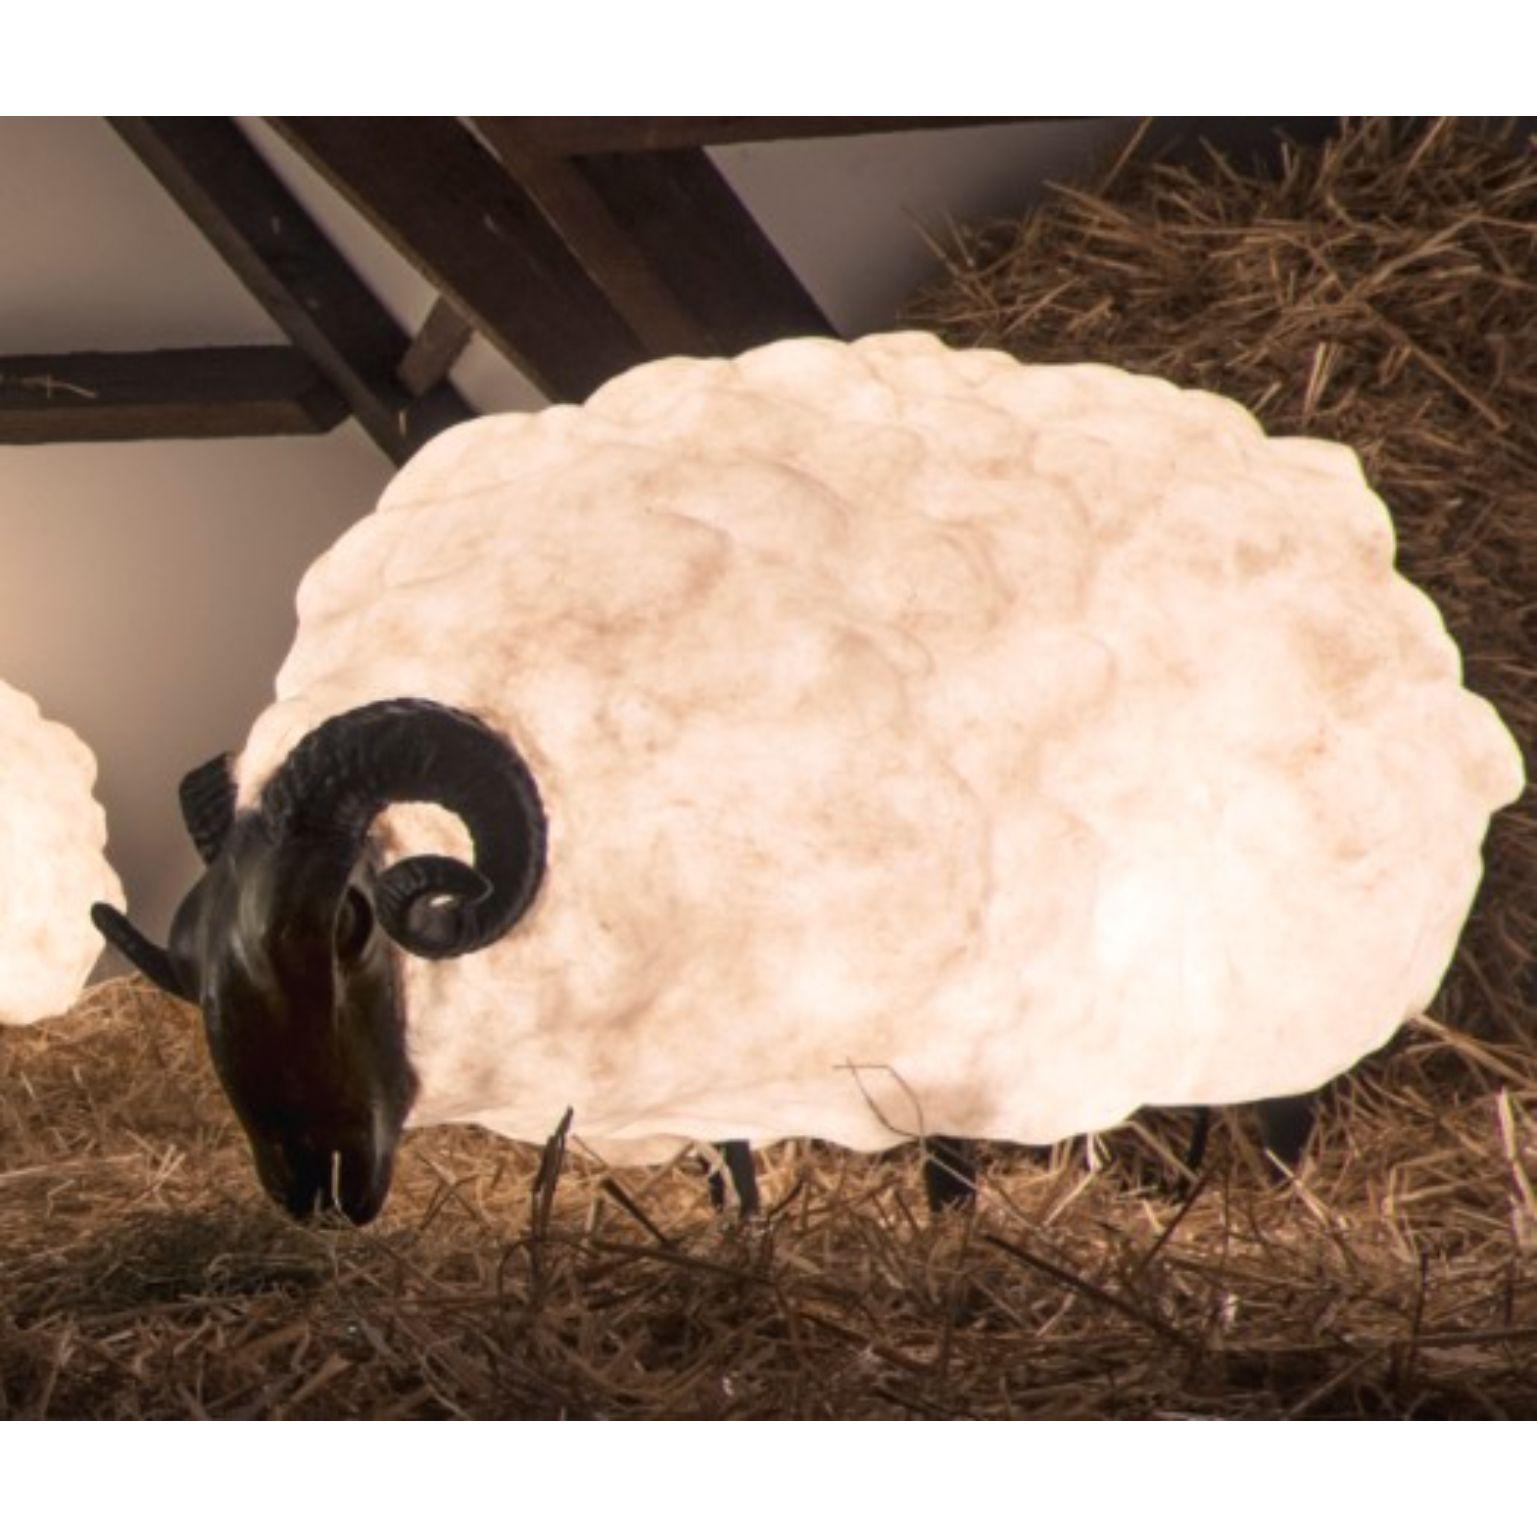 Molly Light sculpture by Atelier Haute Cuisine
Dimensions: 65 x 11 x 75 cm
Materials: Fiberglass

All our lamps can be wired according to each country. If sold to the USA it will be wired for the USA for instance.

The cloned sheep Dolly gave